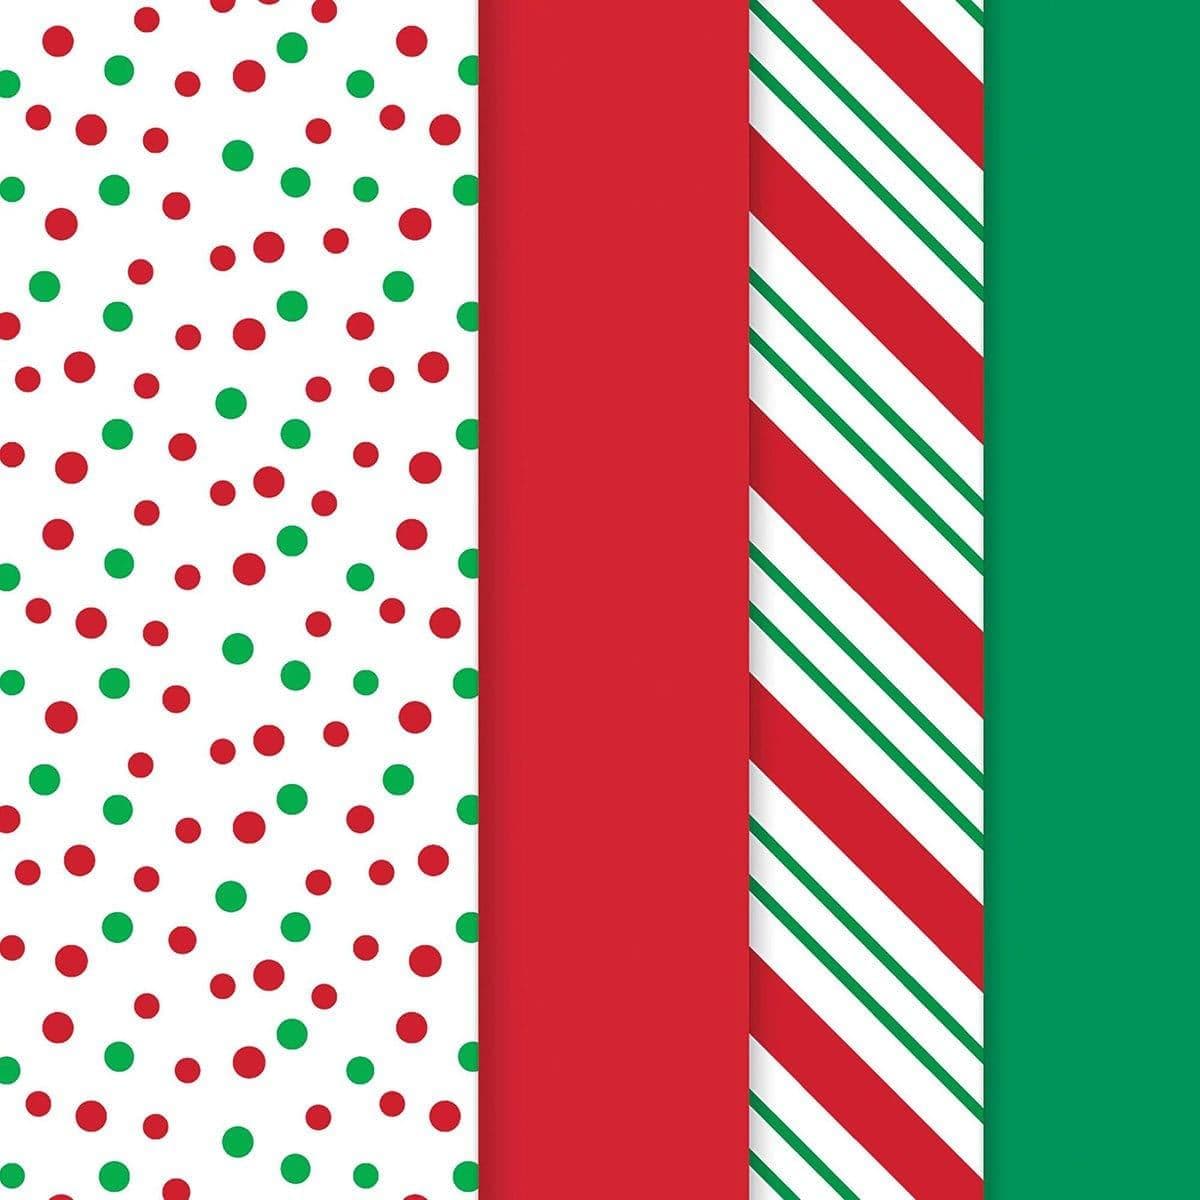 Buy Christmas Chritmas stripes Tissue Paper sold at Party Expert